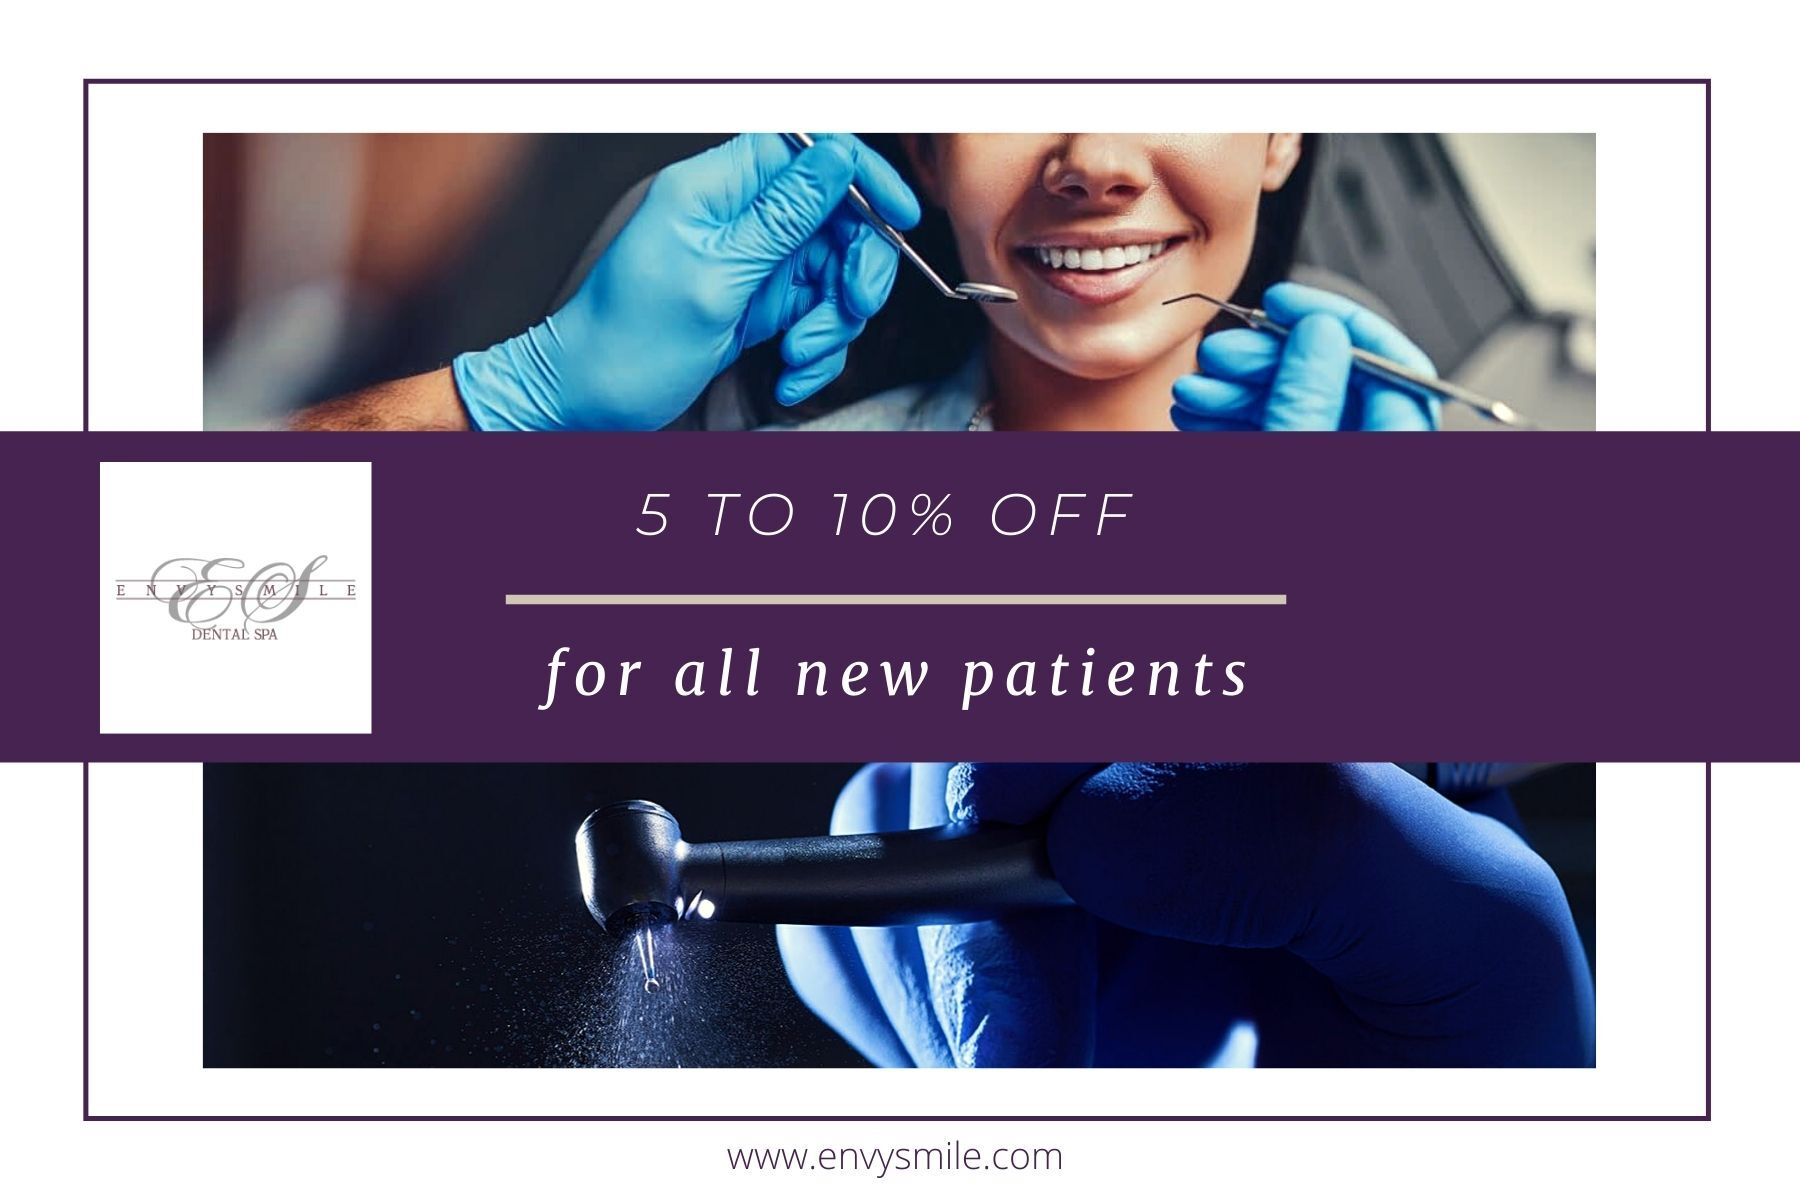 Envy Smile Dental Spa offers a discount'